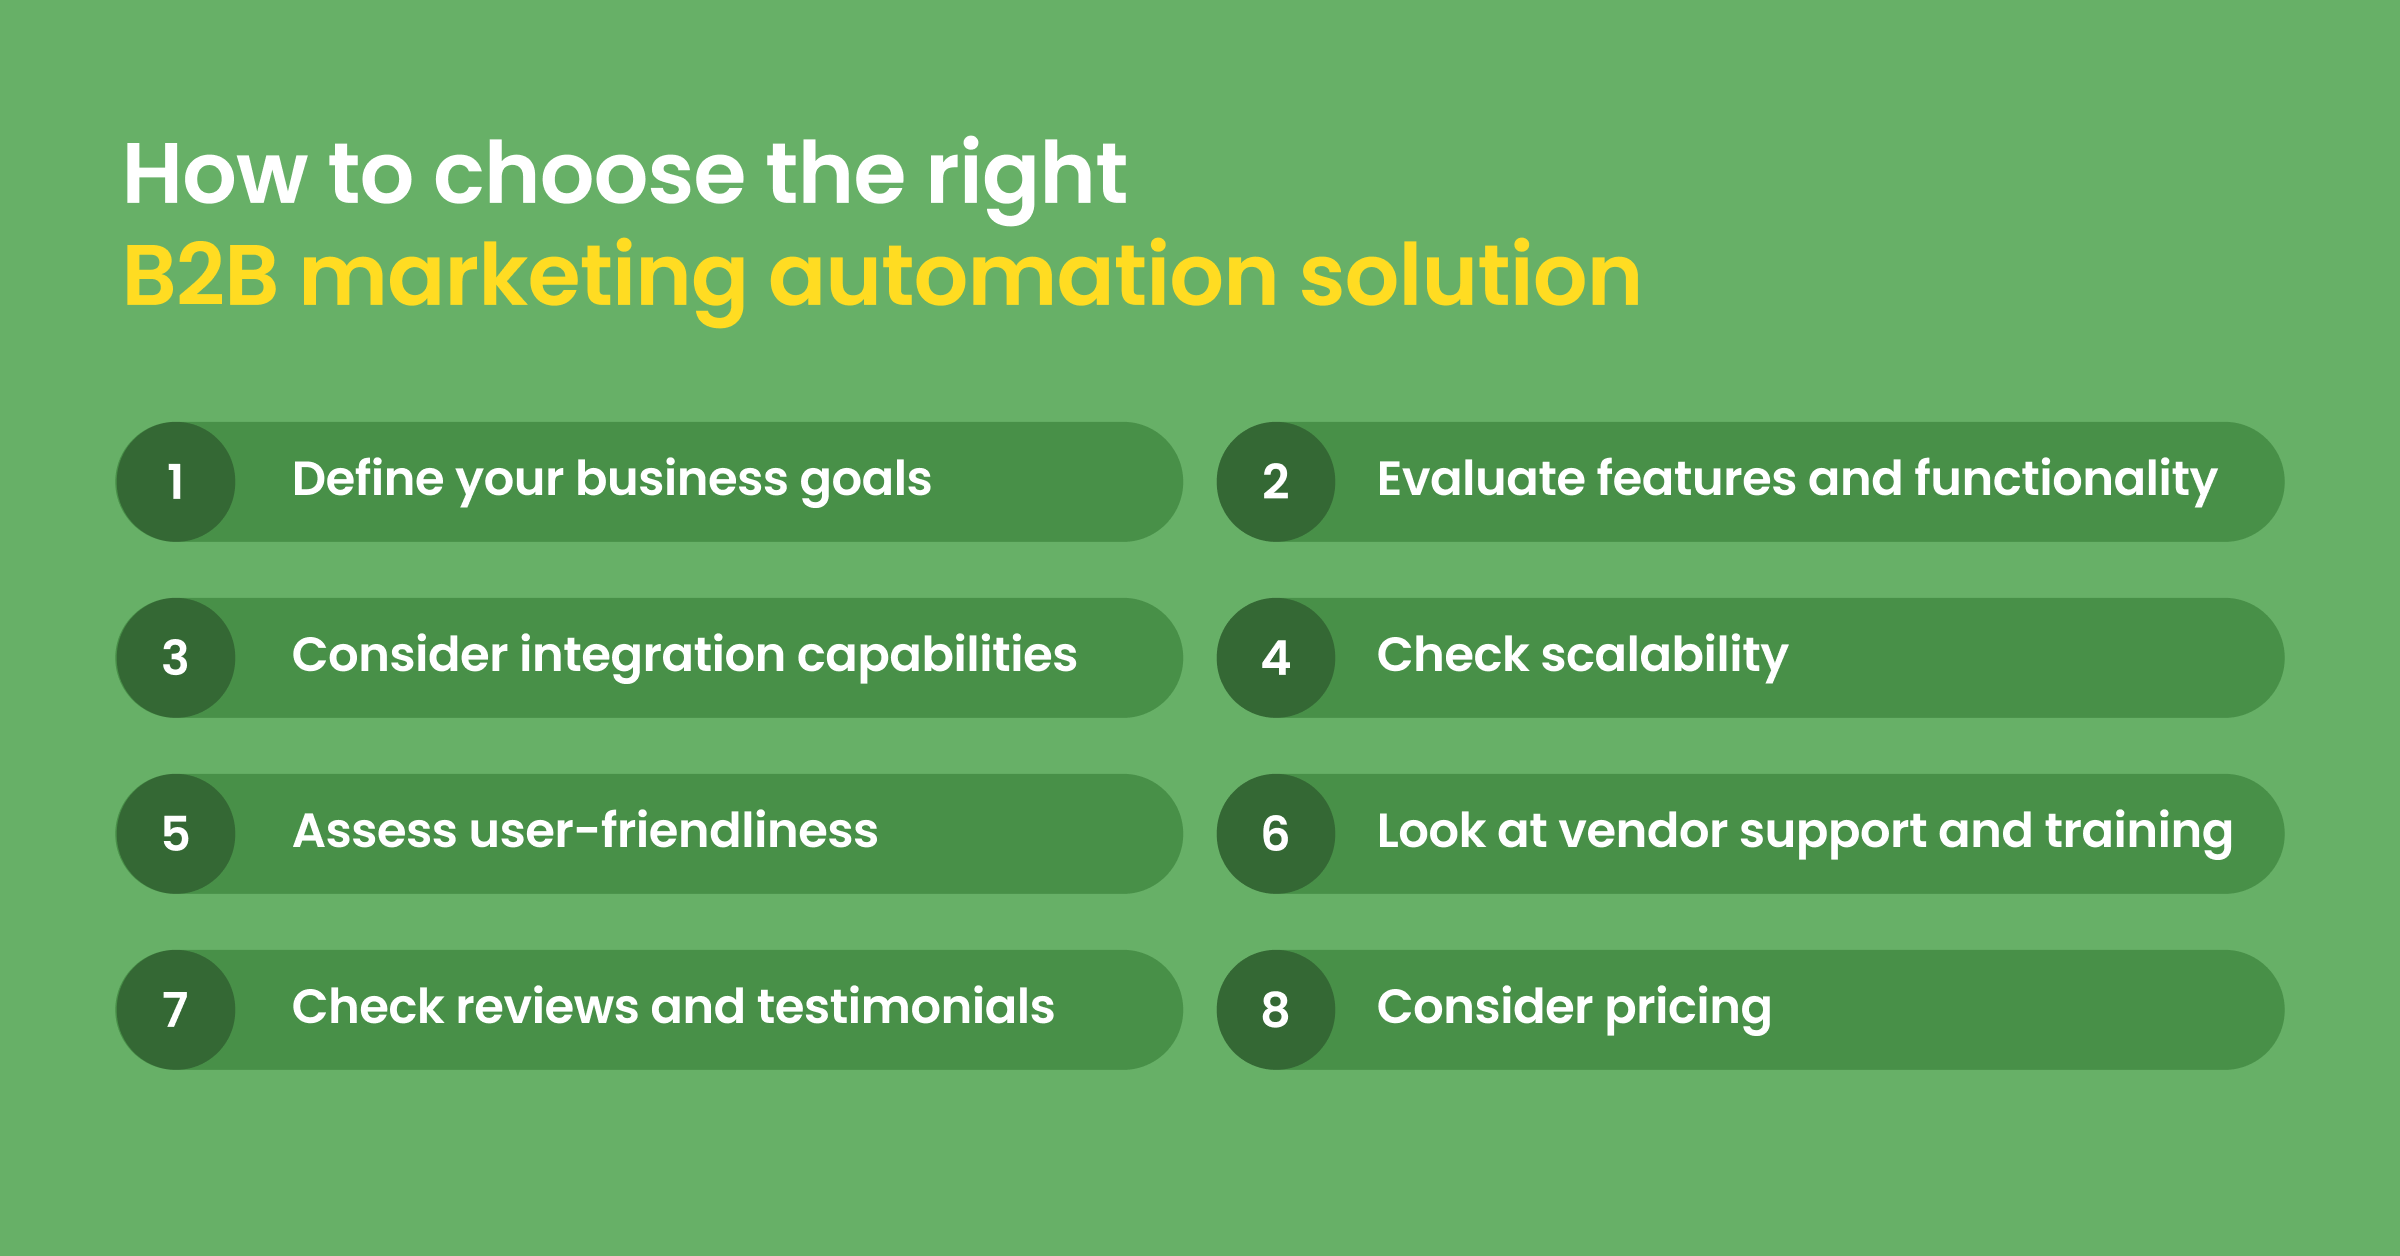 How to choose the right B2B marketing automation solution